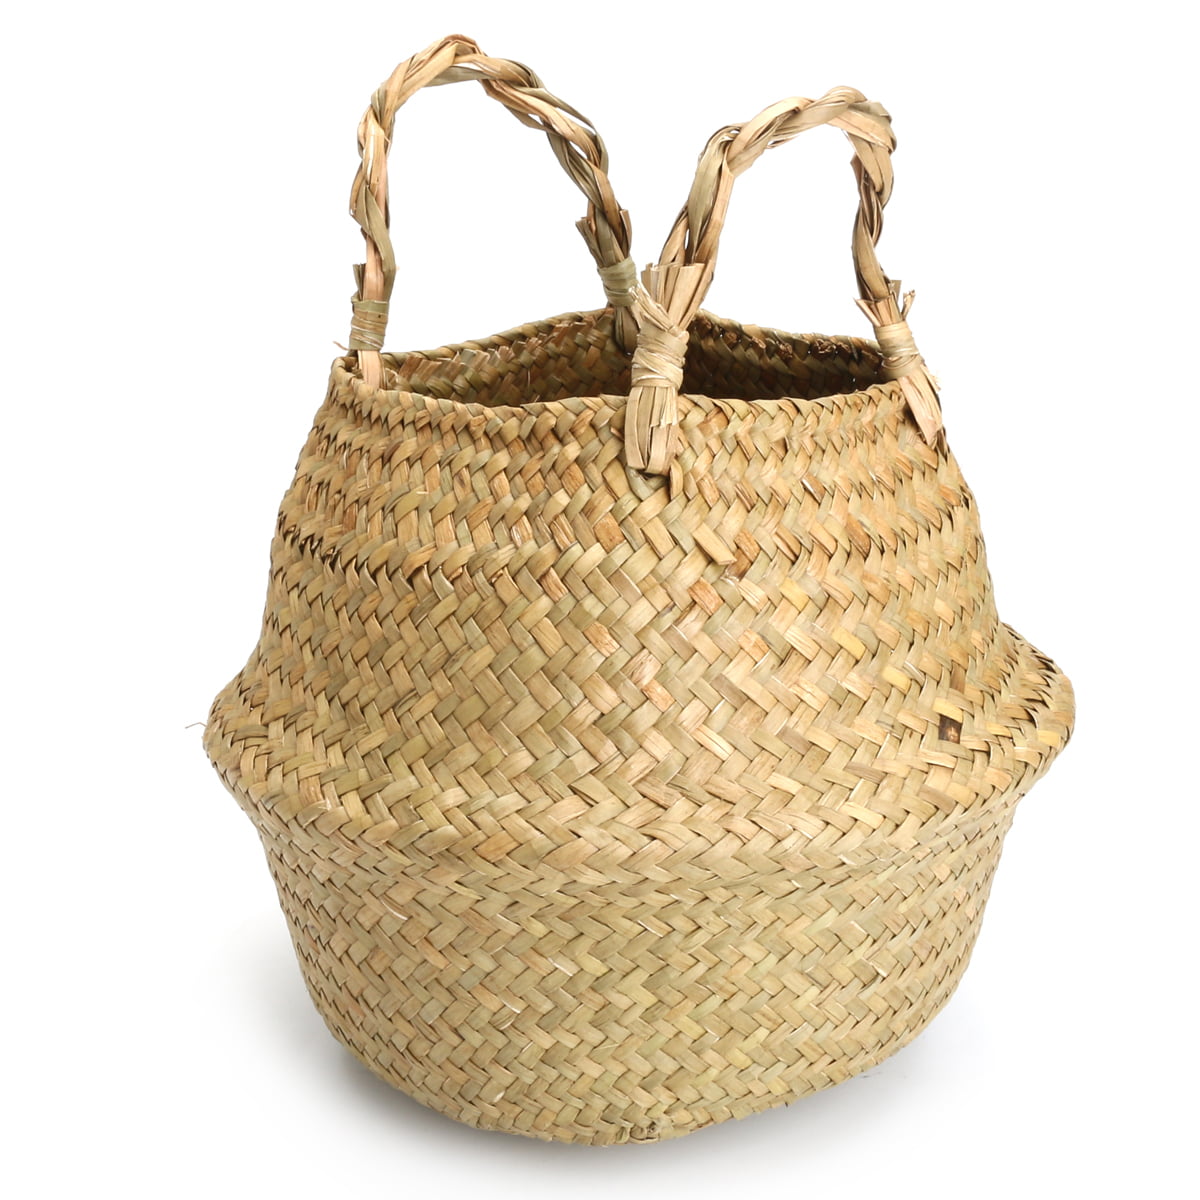 Seagrass Basket with Handles Whitelotous Black Woven Seagrass Belly Basket for Plant Toy Organization Multipurpose Decorative Storage Baskets Small Picnic 